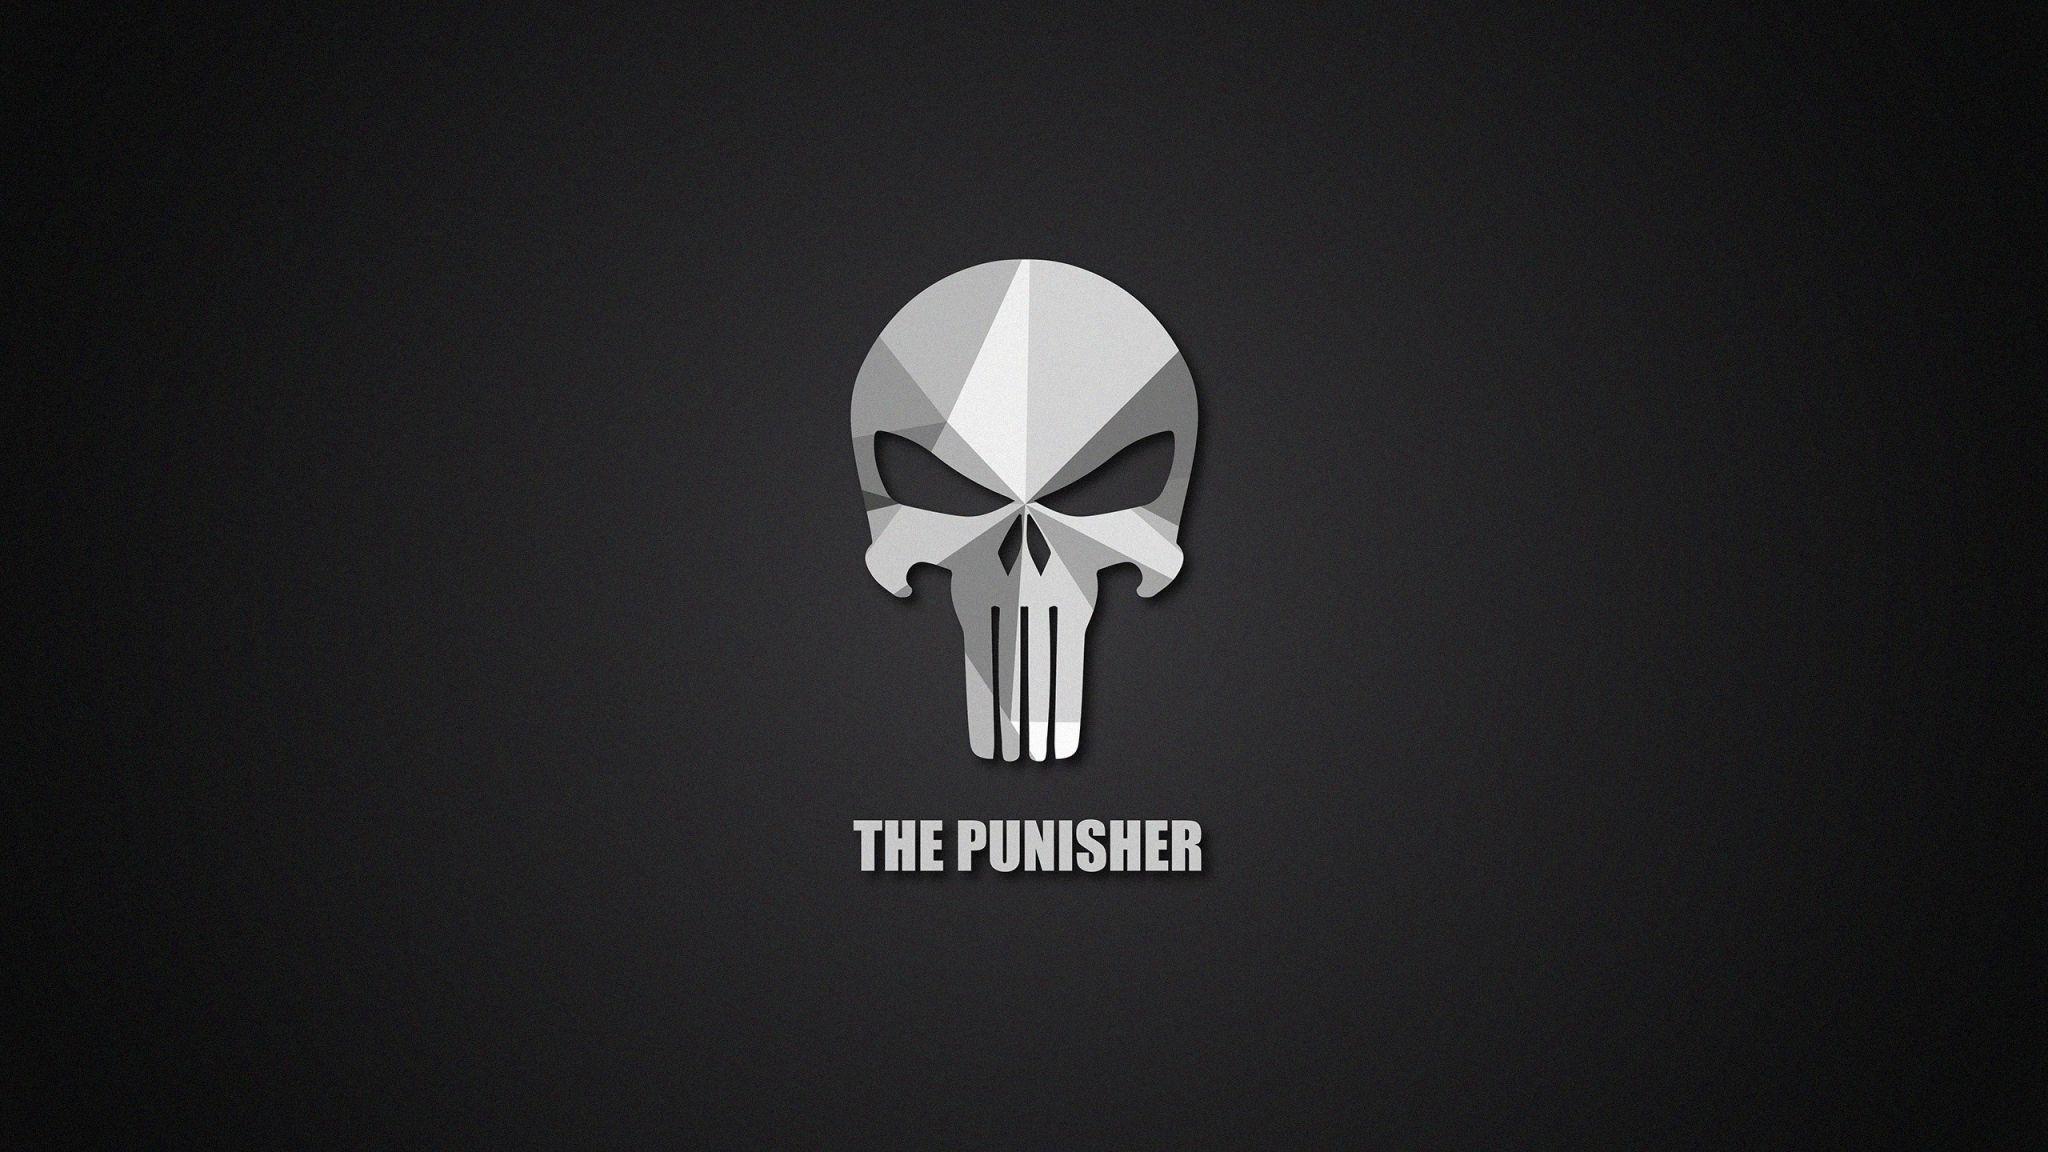 The Punisher Material Logo, HD Tv Shows, 4k Wallpapers, Image